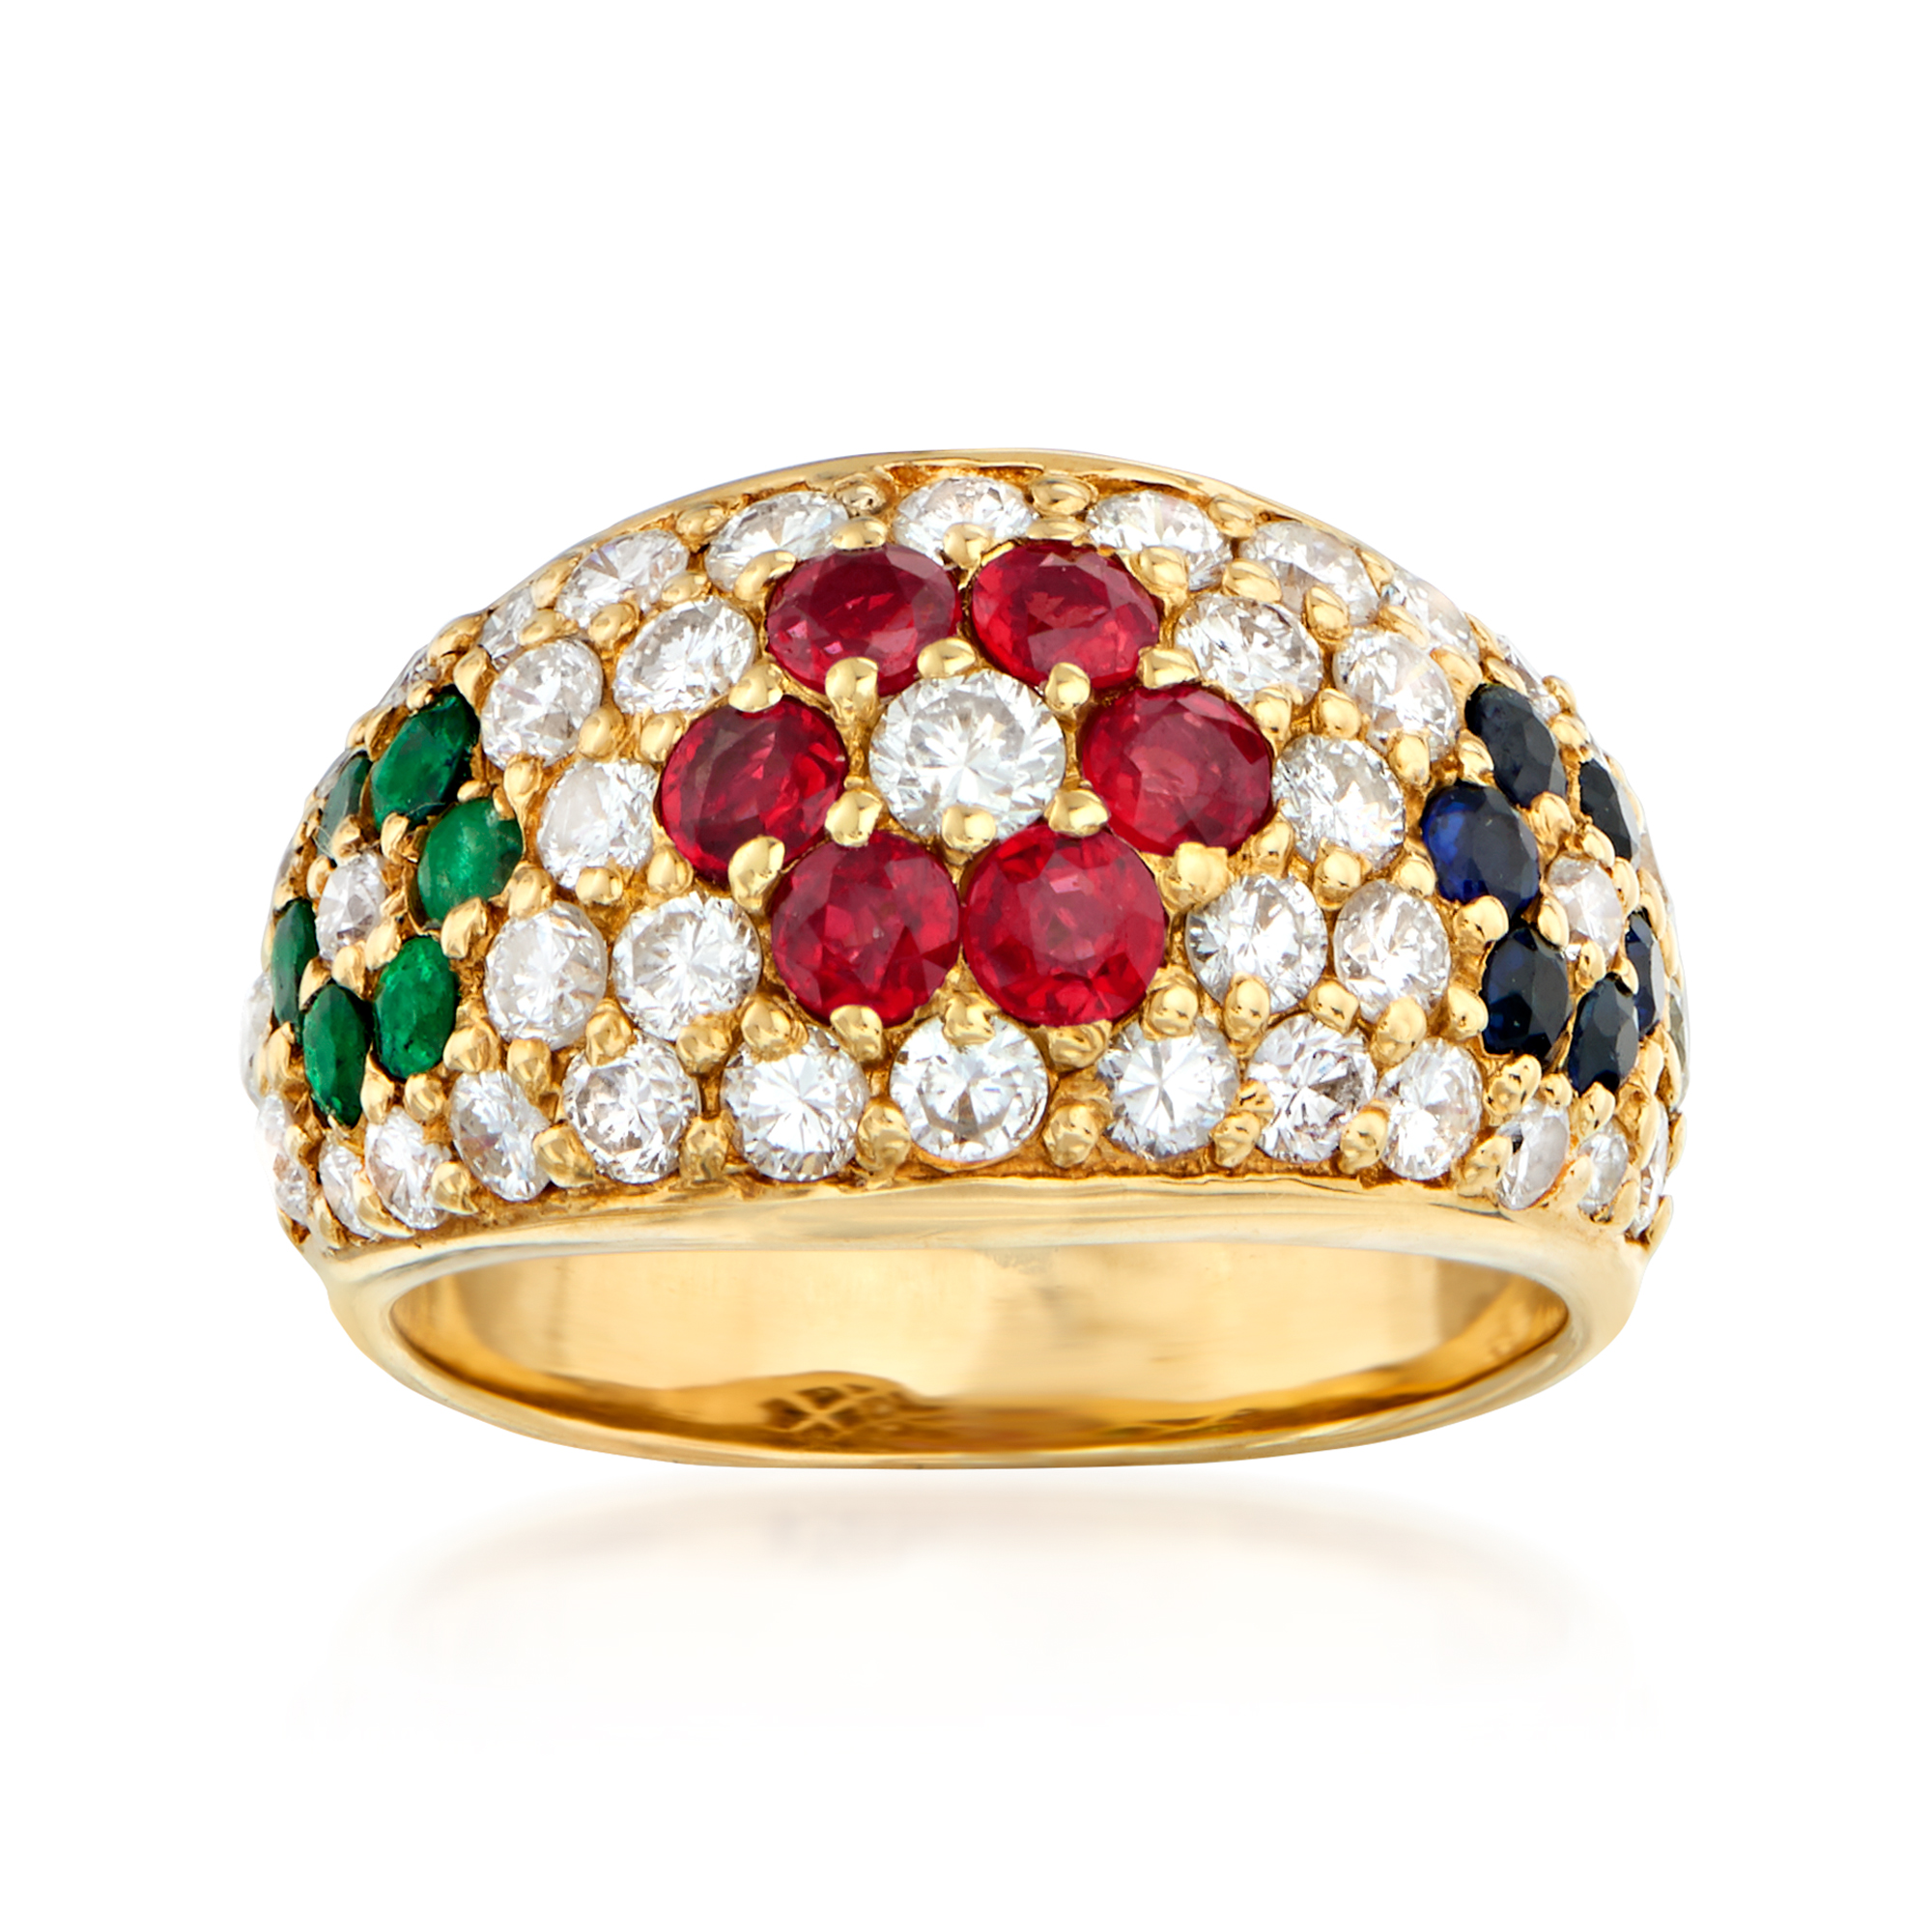 Women's Luxury Ruby & Diamond .68 ct High Quality Cluster Ring G-SI2 Sizable 6